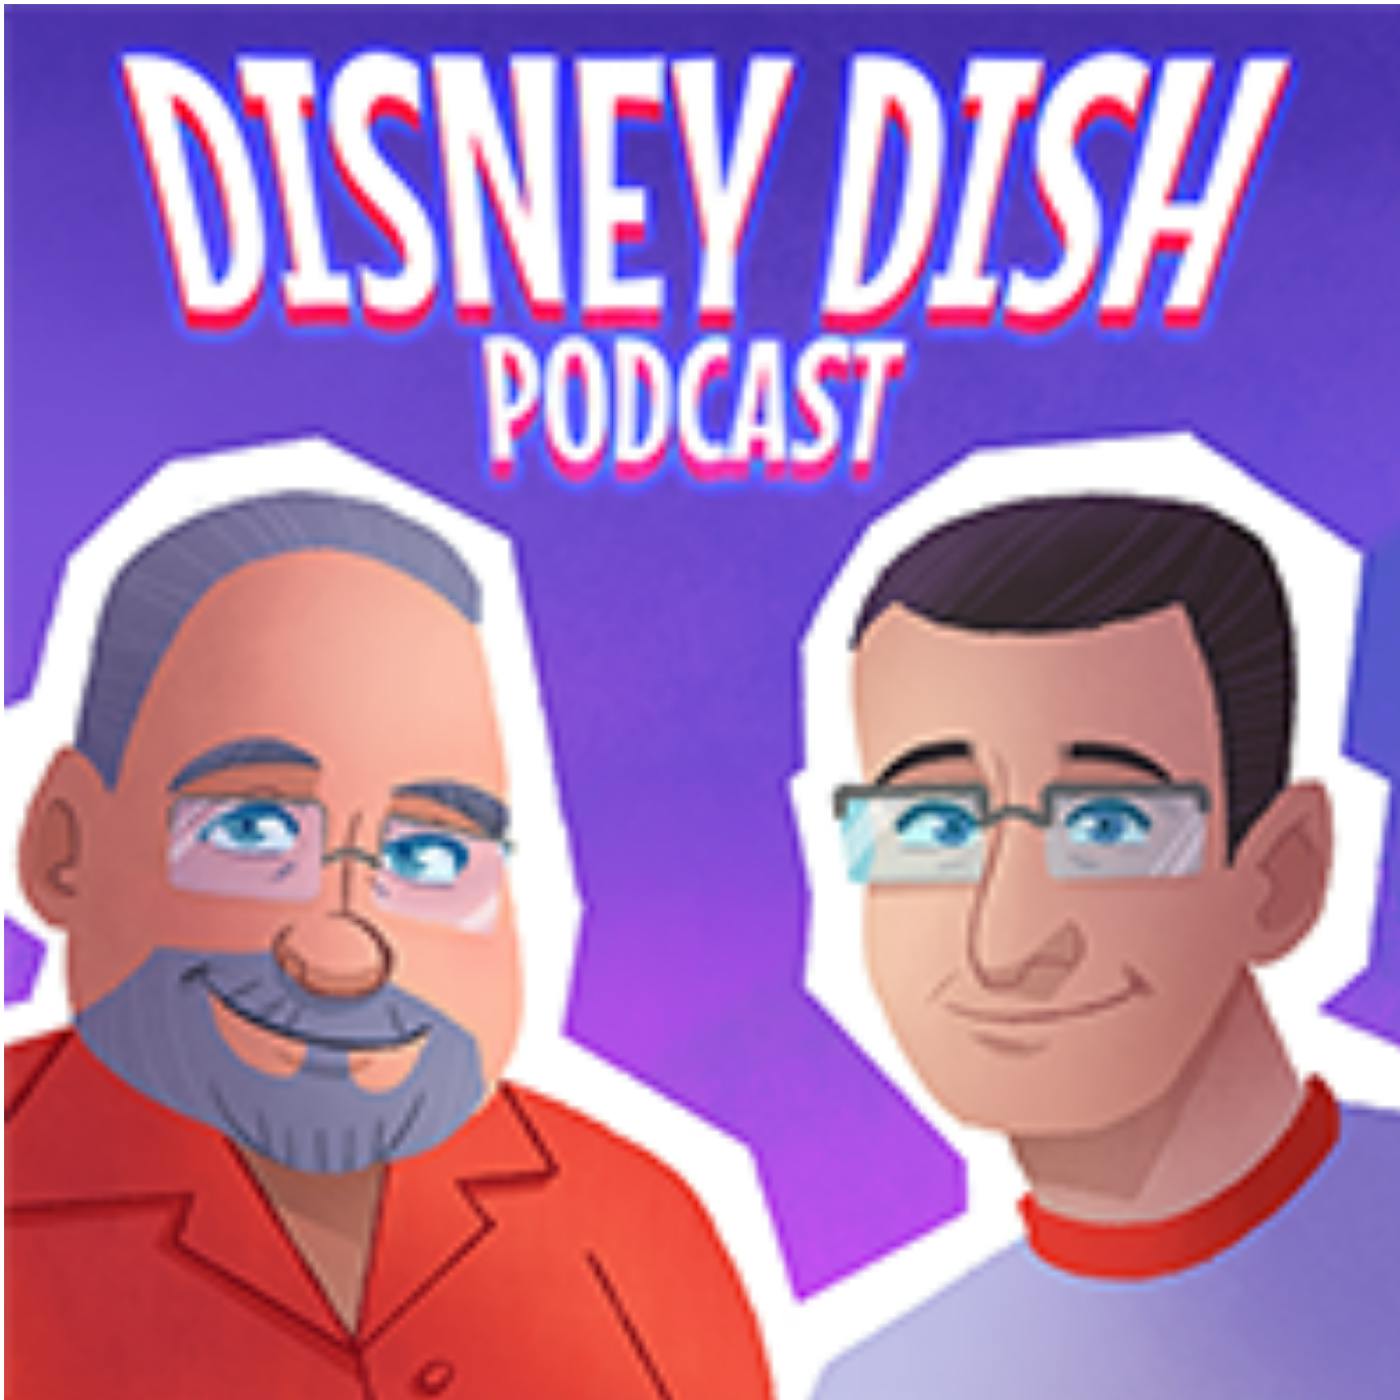 The Disney Dish with Jim Hill Episode 449: Why “Fantasmic Hollywood” never happened at Disney-MGM